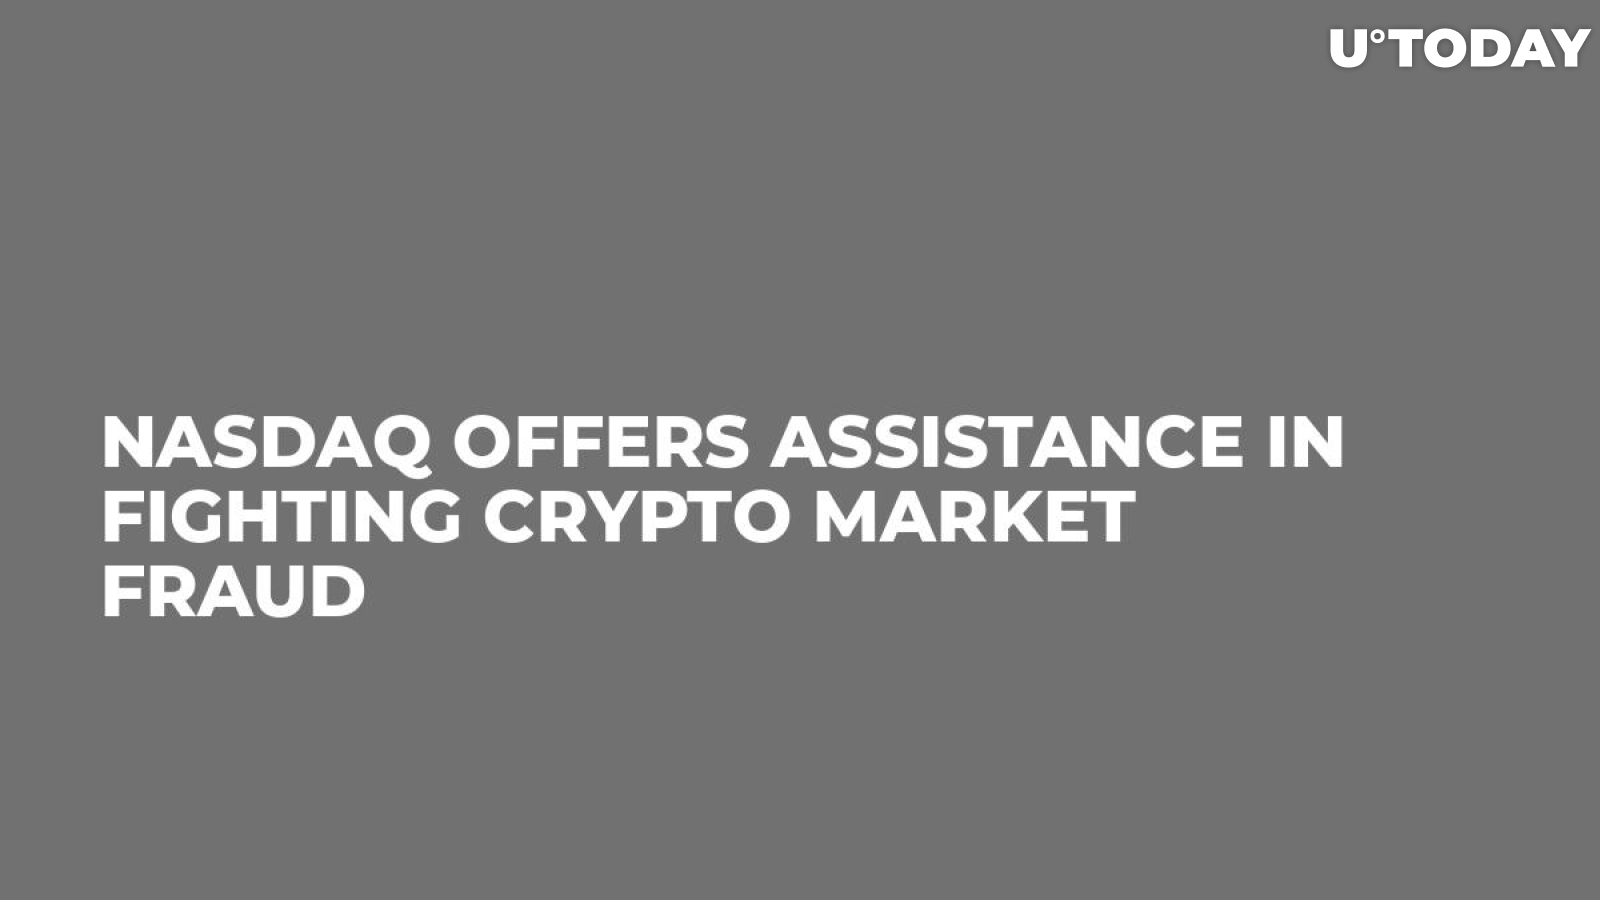 Nasdaq Offers Assistance in Fighting Crypto Market Fraud